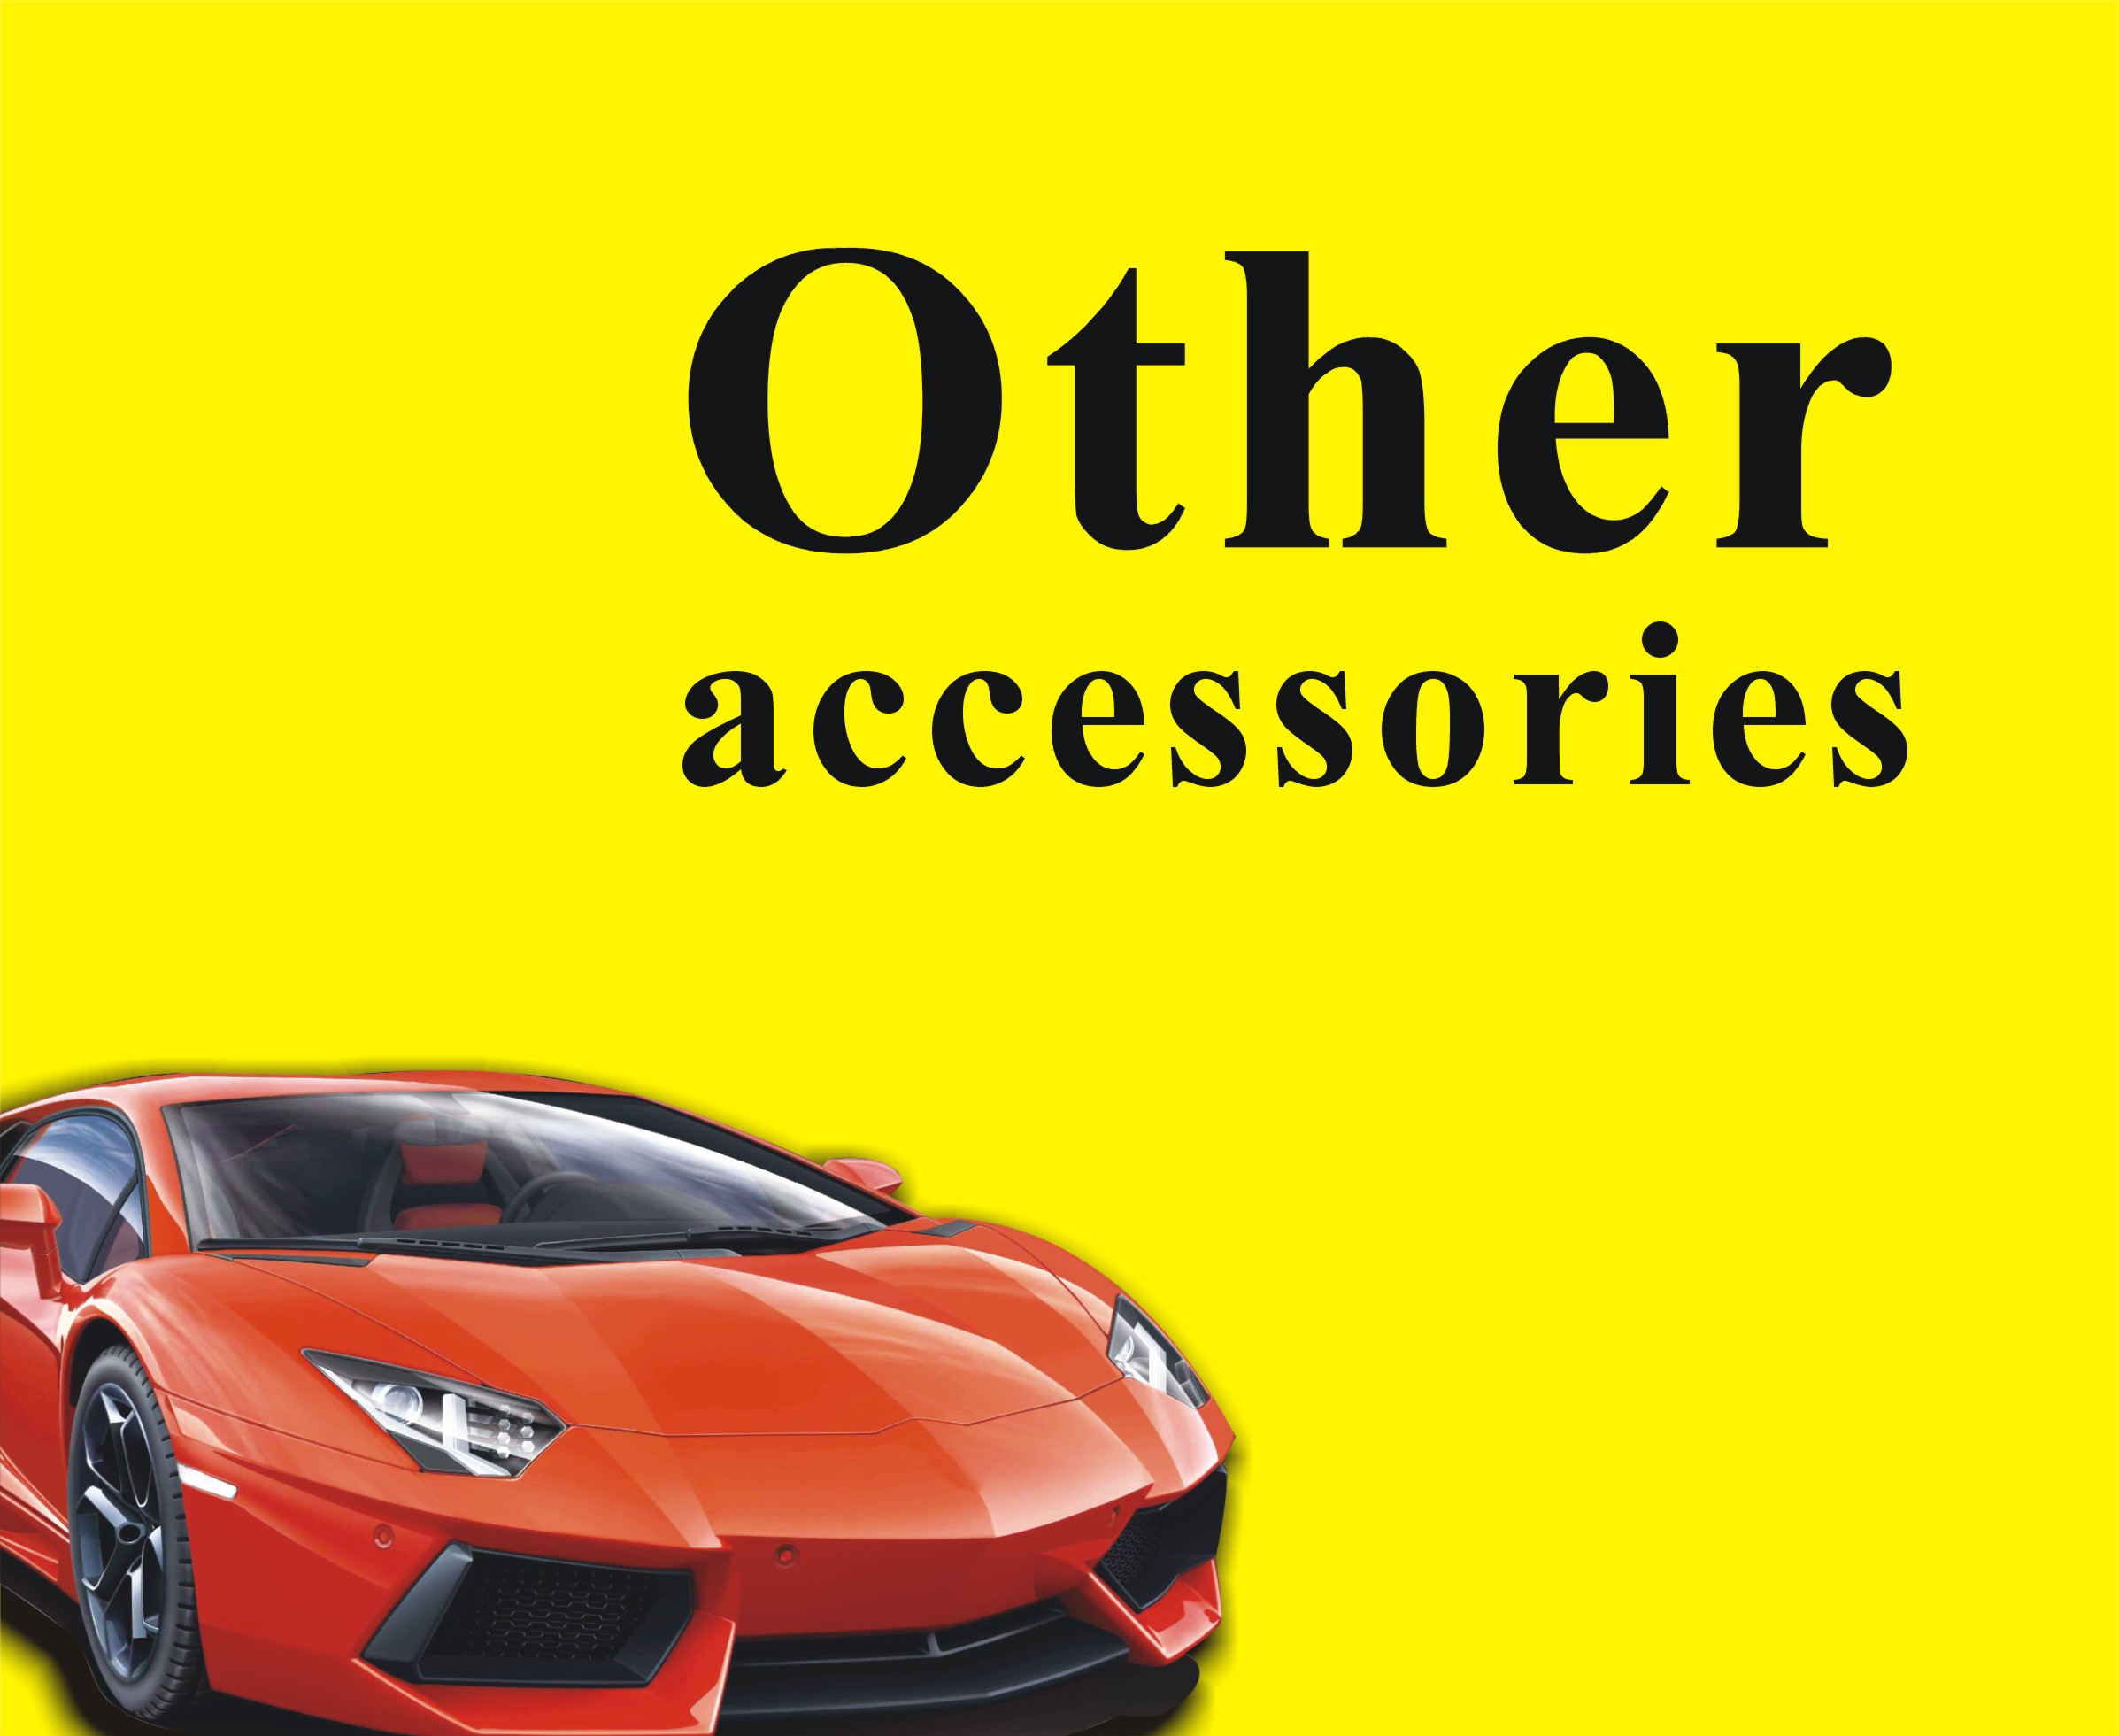 Other Accessories